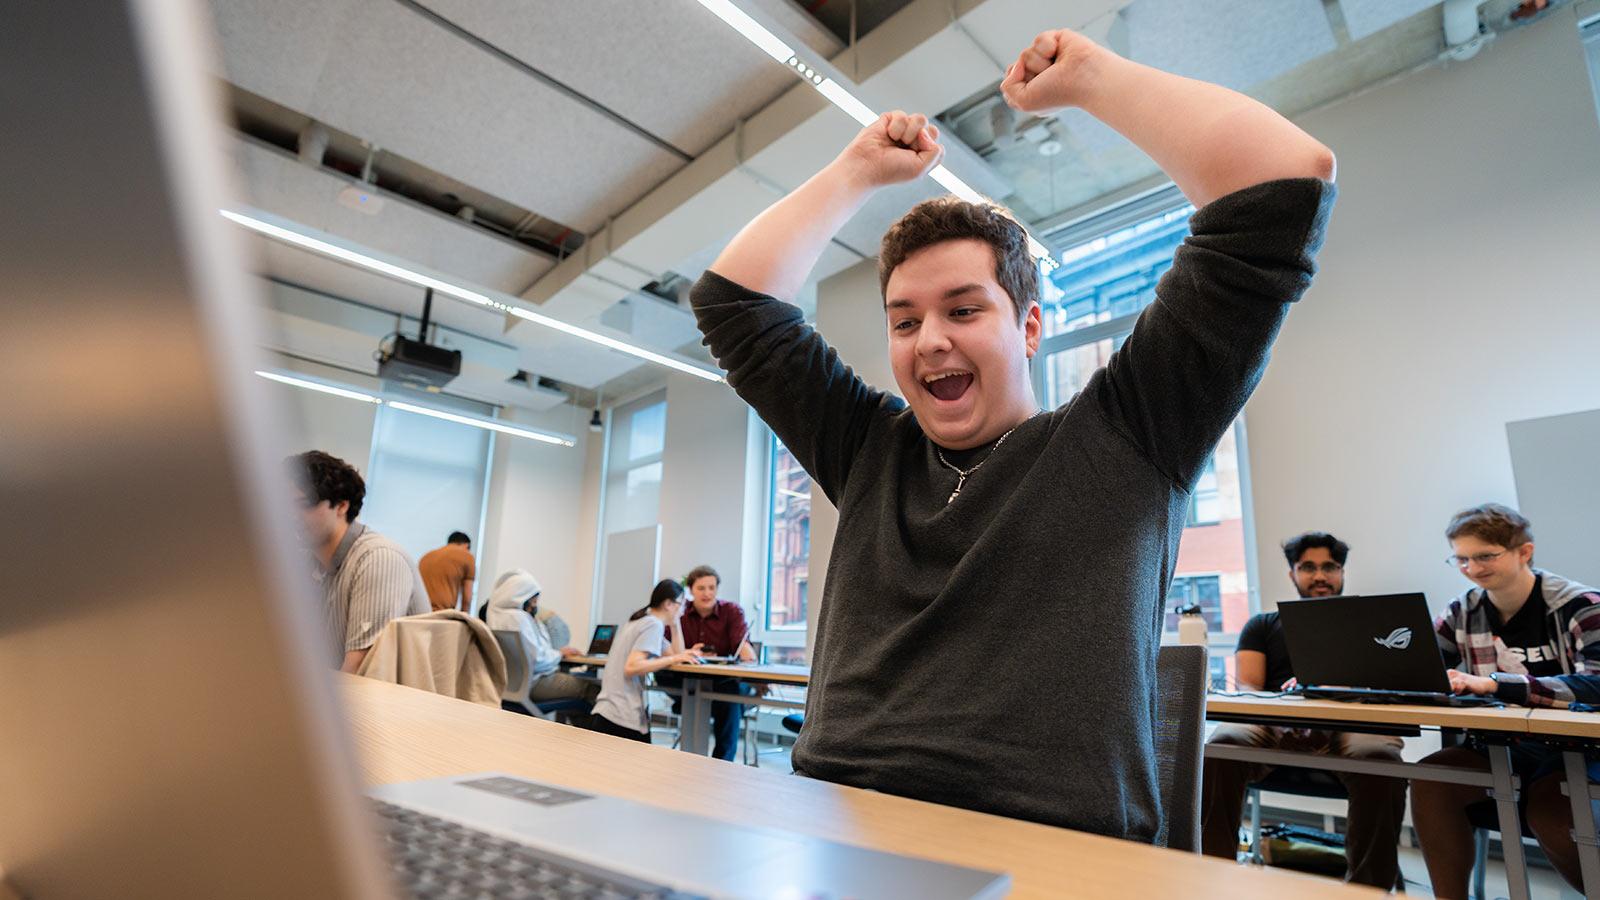 A Pace student cheers as he completes a video game